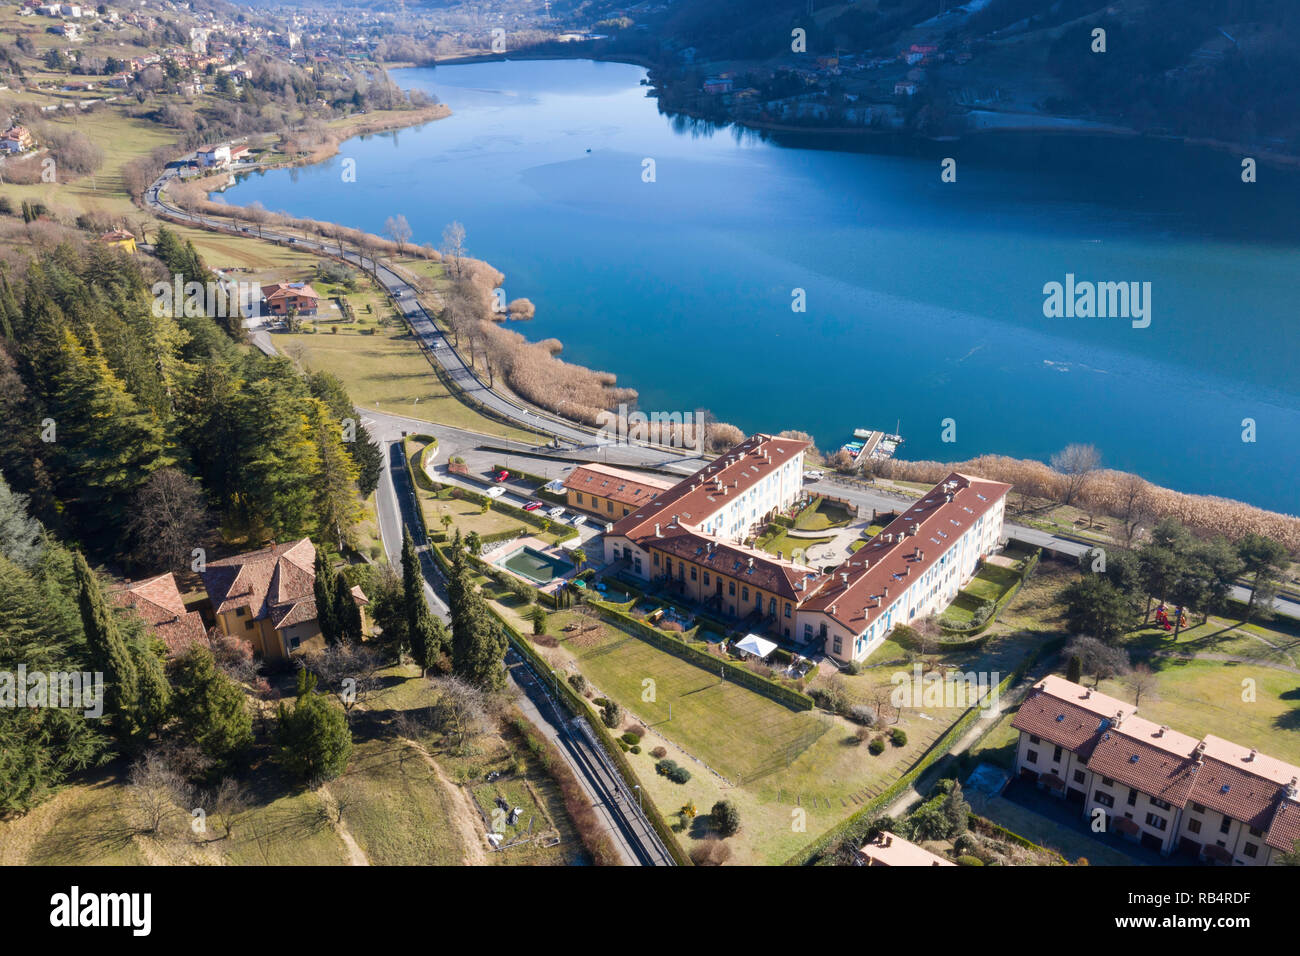 mountains rivers lakes and clear skies, Italy beautiful landscapes Stock Photo